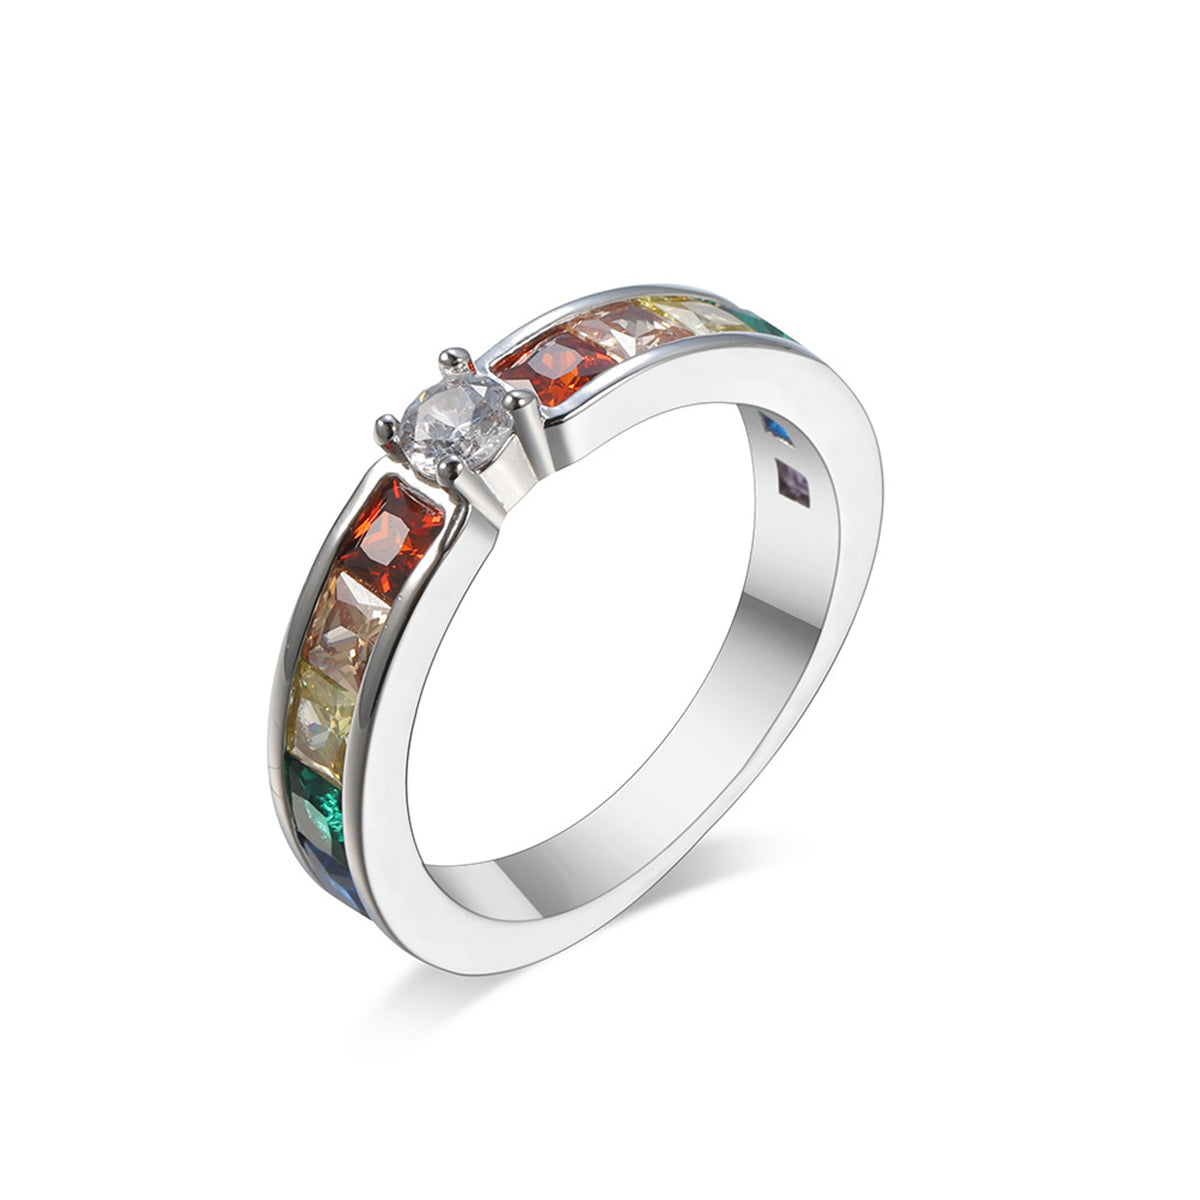 Jewel-Tone Crystal & Cubic Zirconia Channel Ring